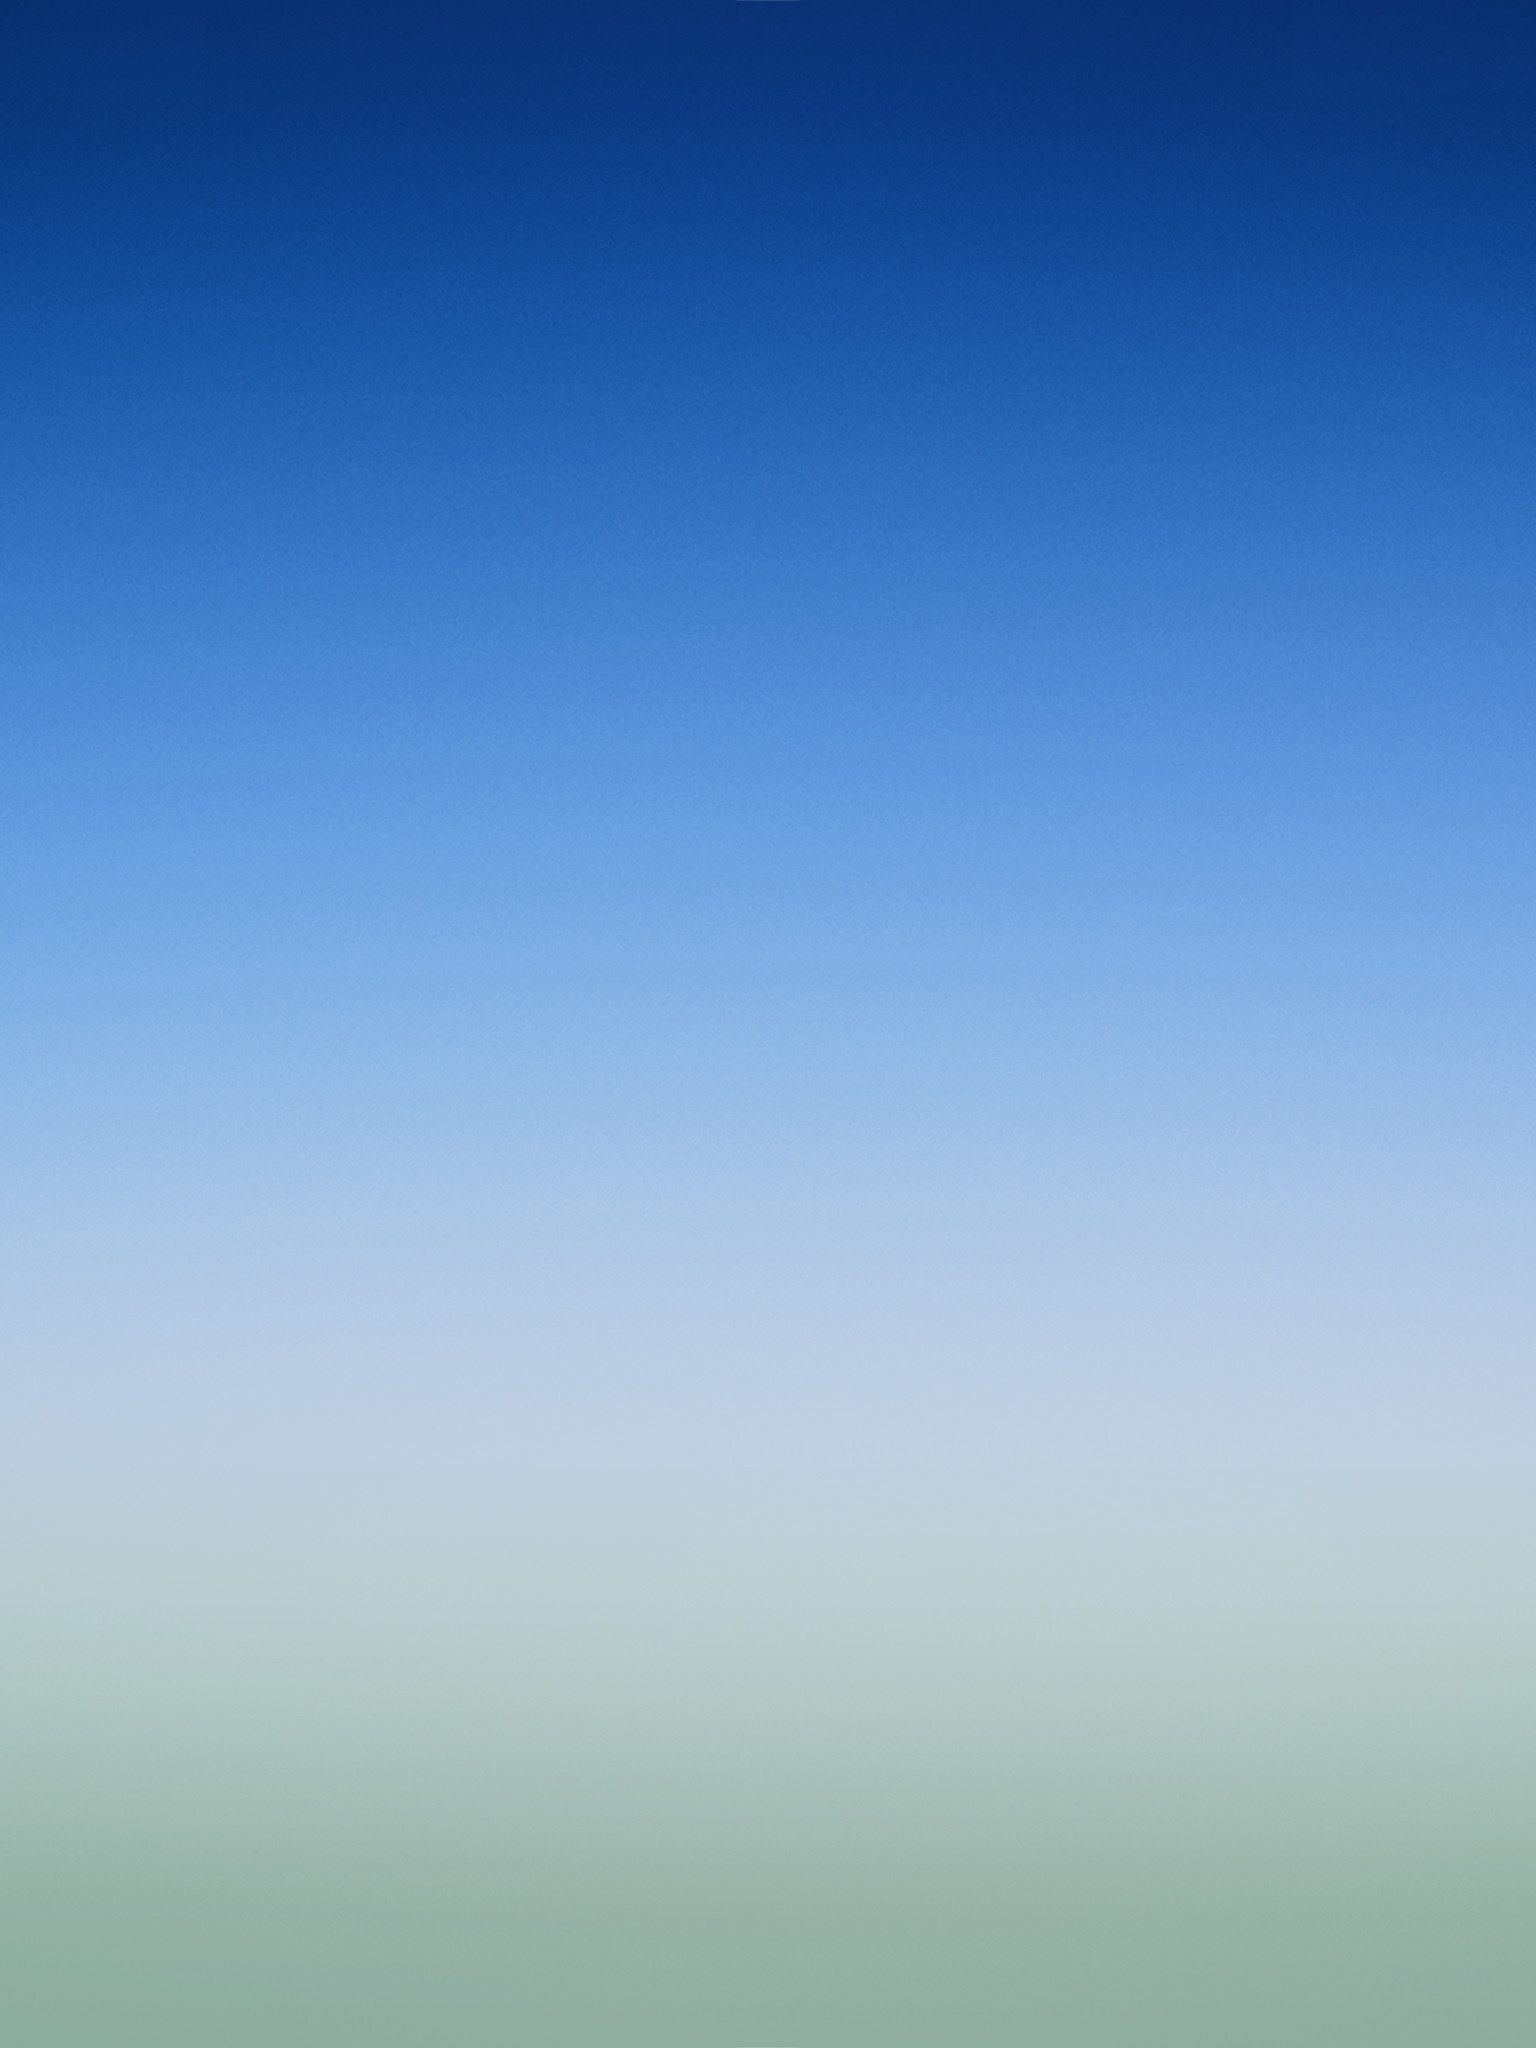 1536x2048 Download iOS 7 Wallpaper for iPad 1536 2048 resolution 